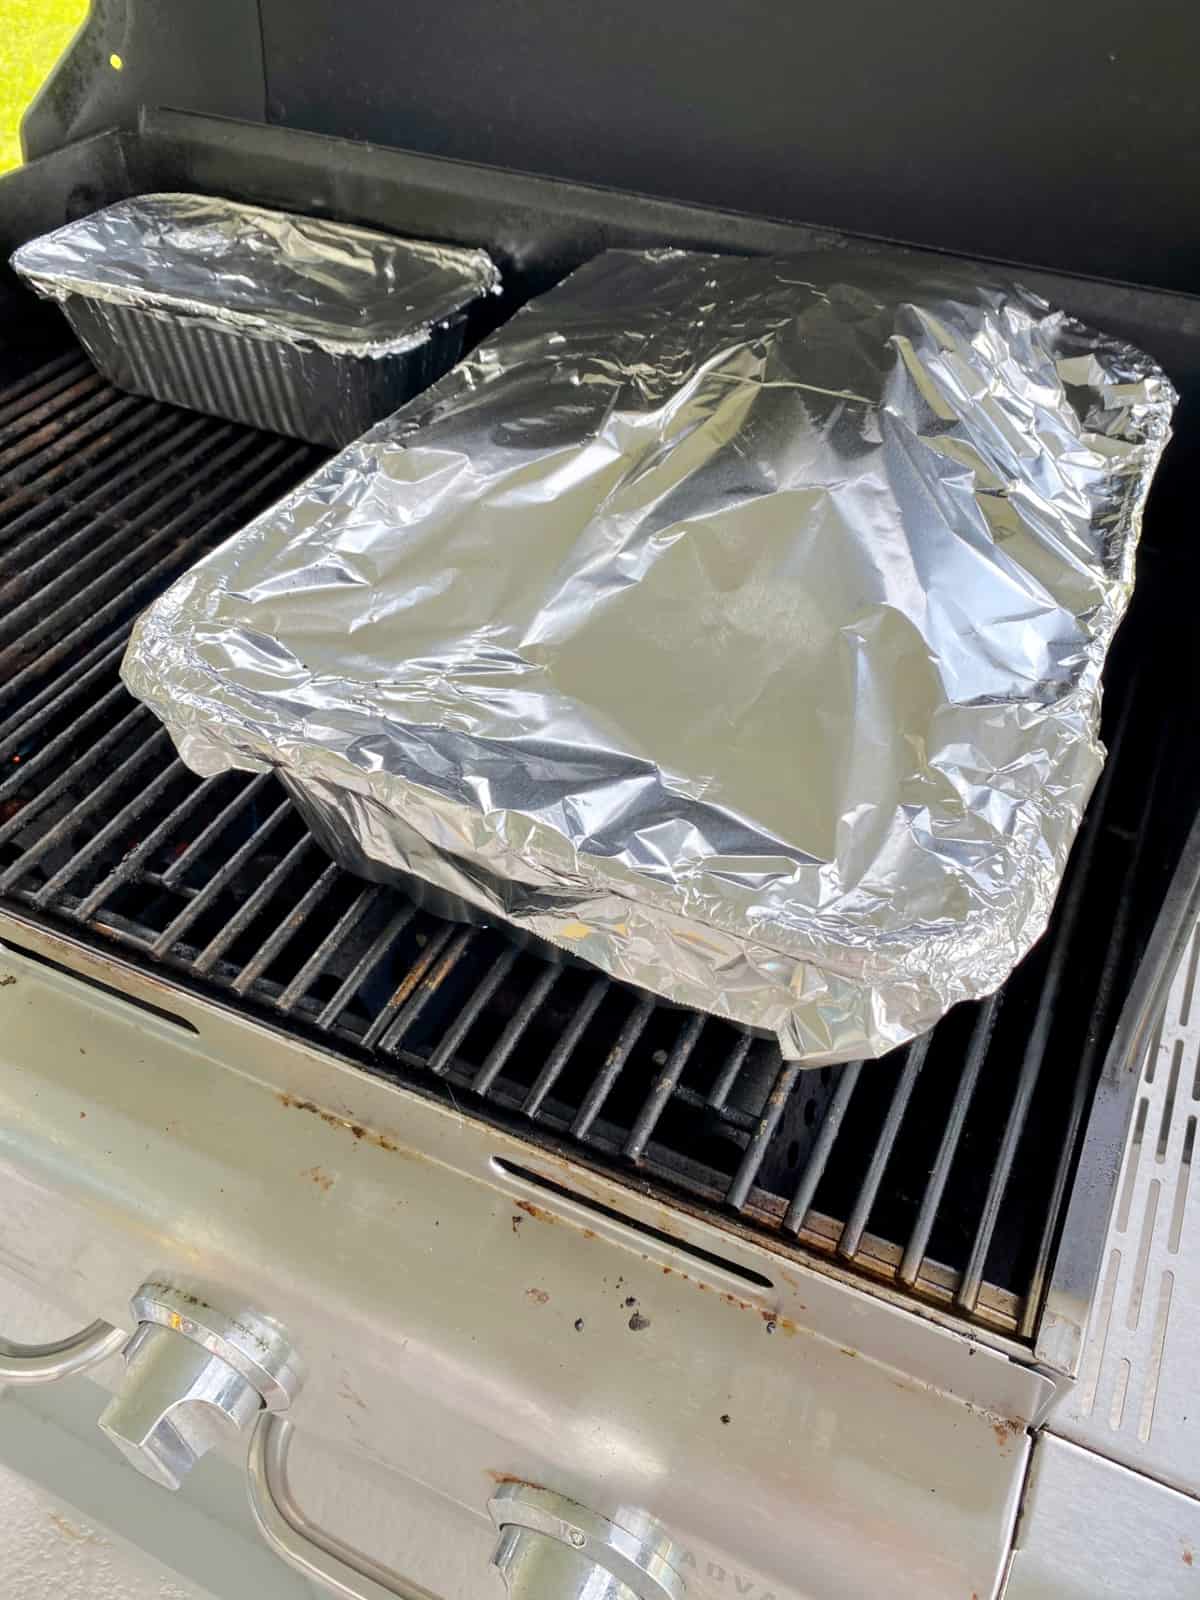 Two metal pans wrapped with aluminum foil on top of a grill.